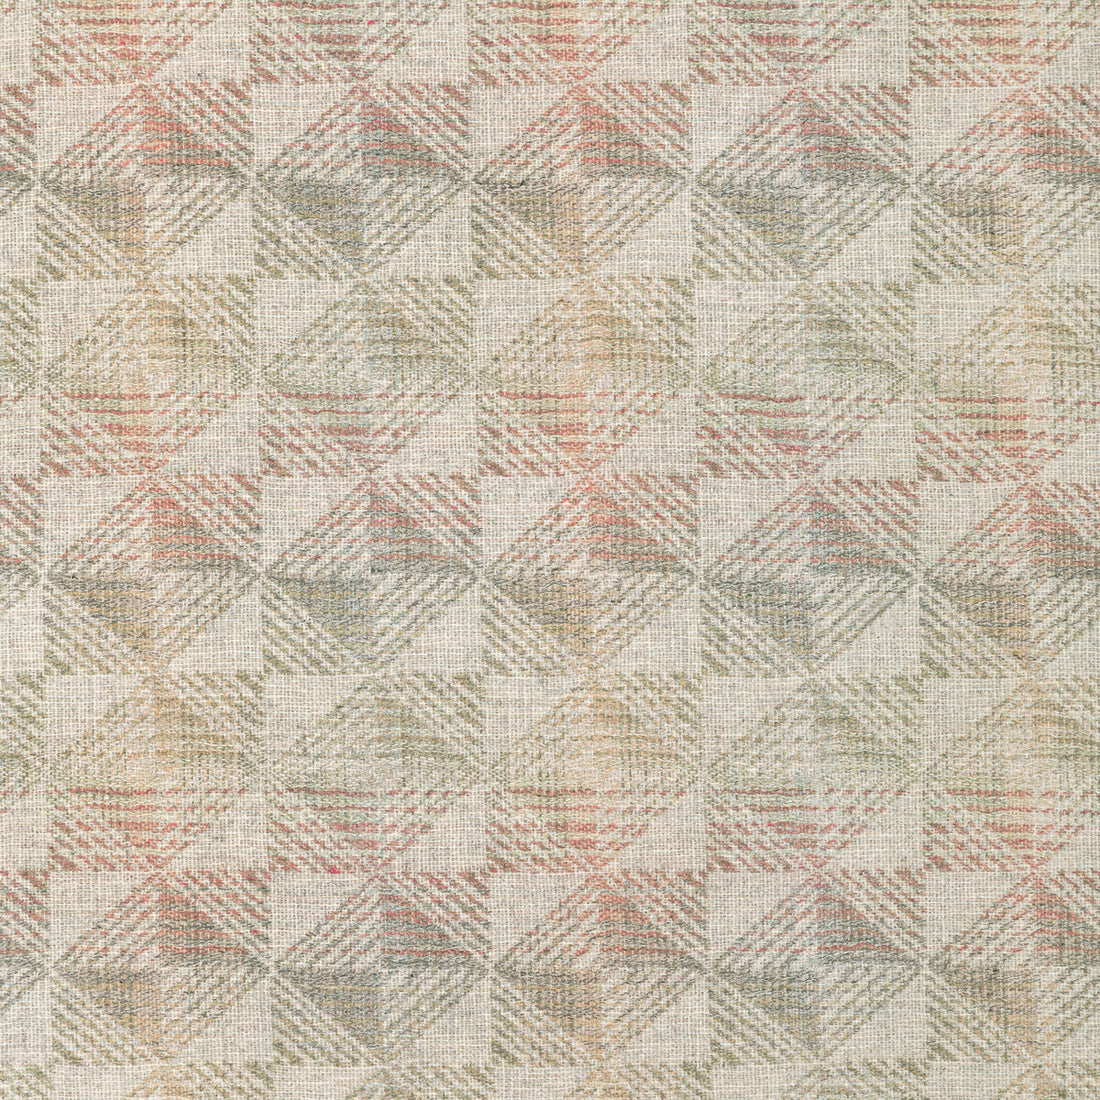 Quito fabric in succulent color - pattern 36397.324.0 - by Kravet Couture in the Barbara Barry Ojai collection